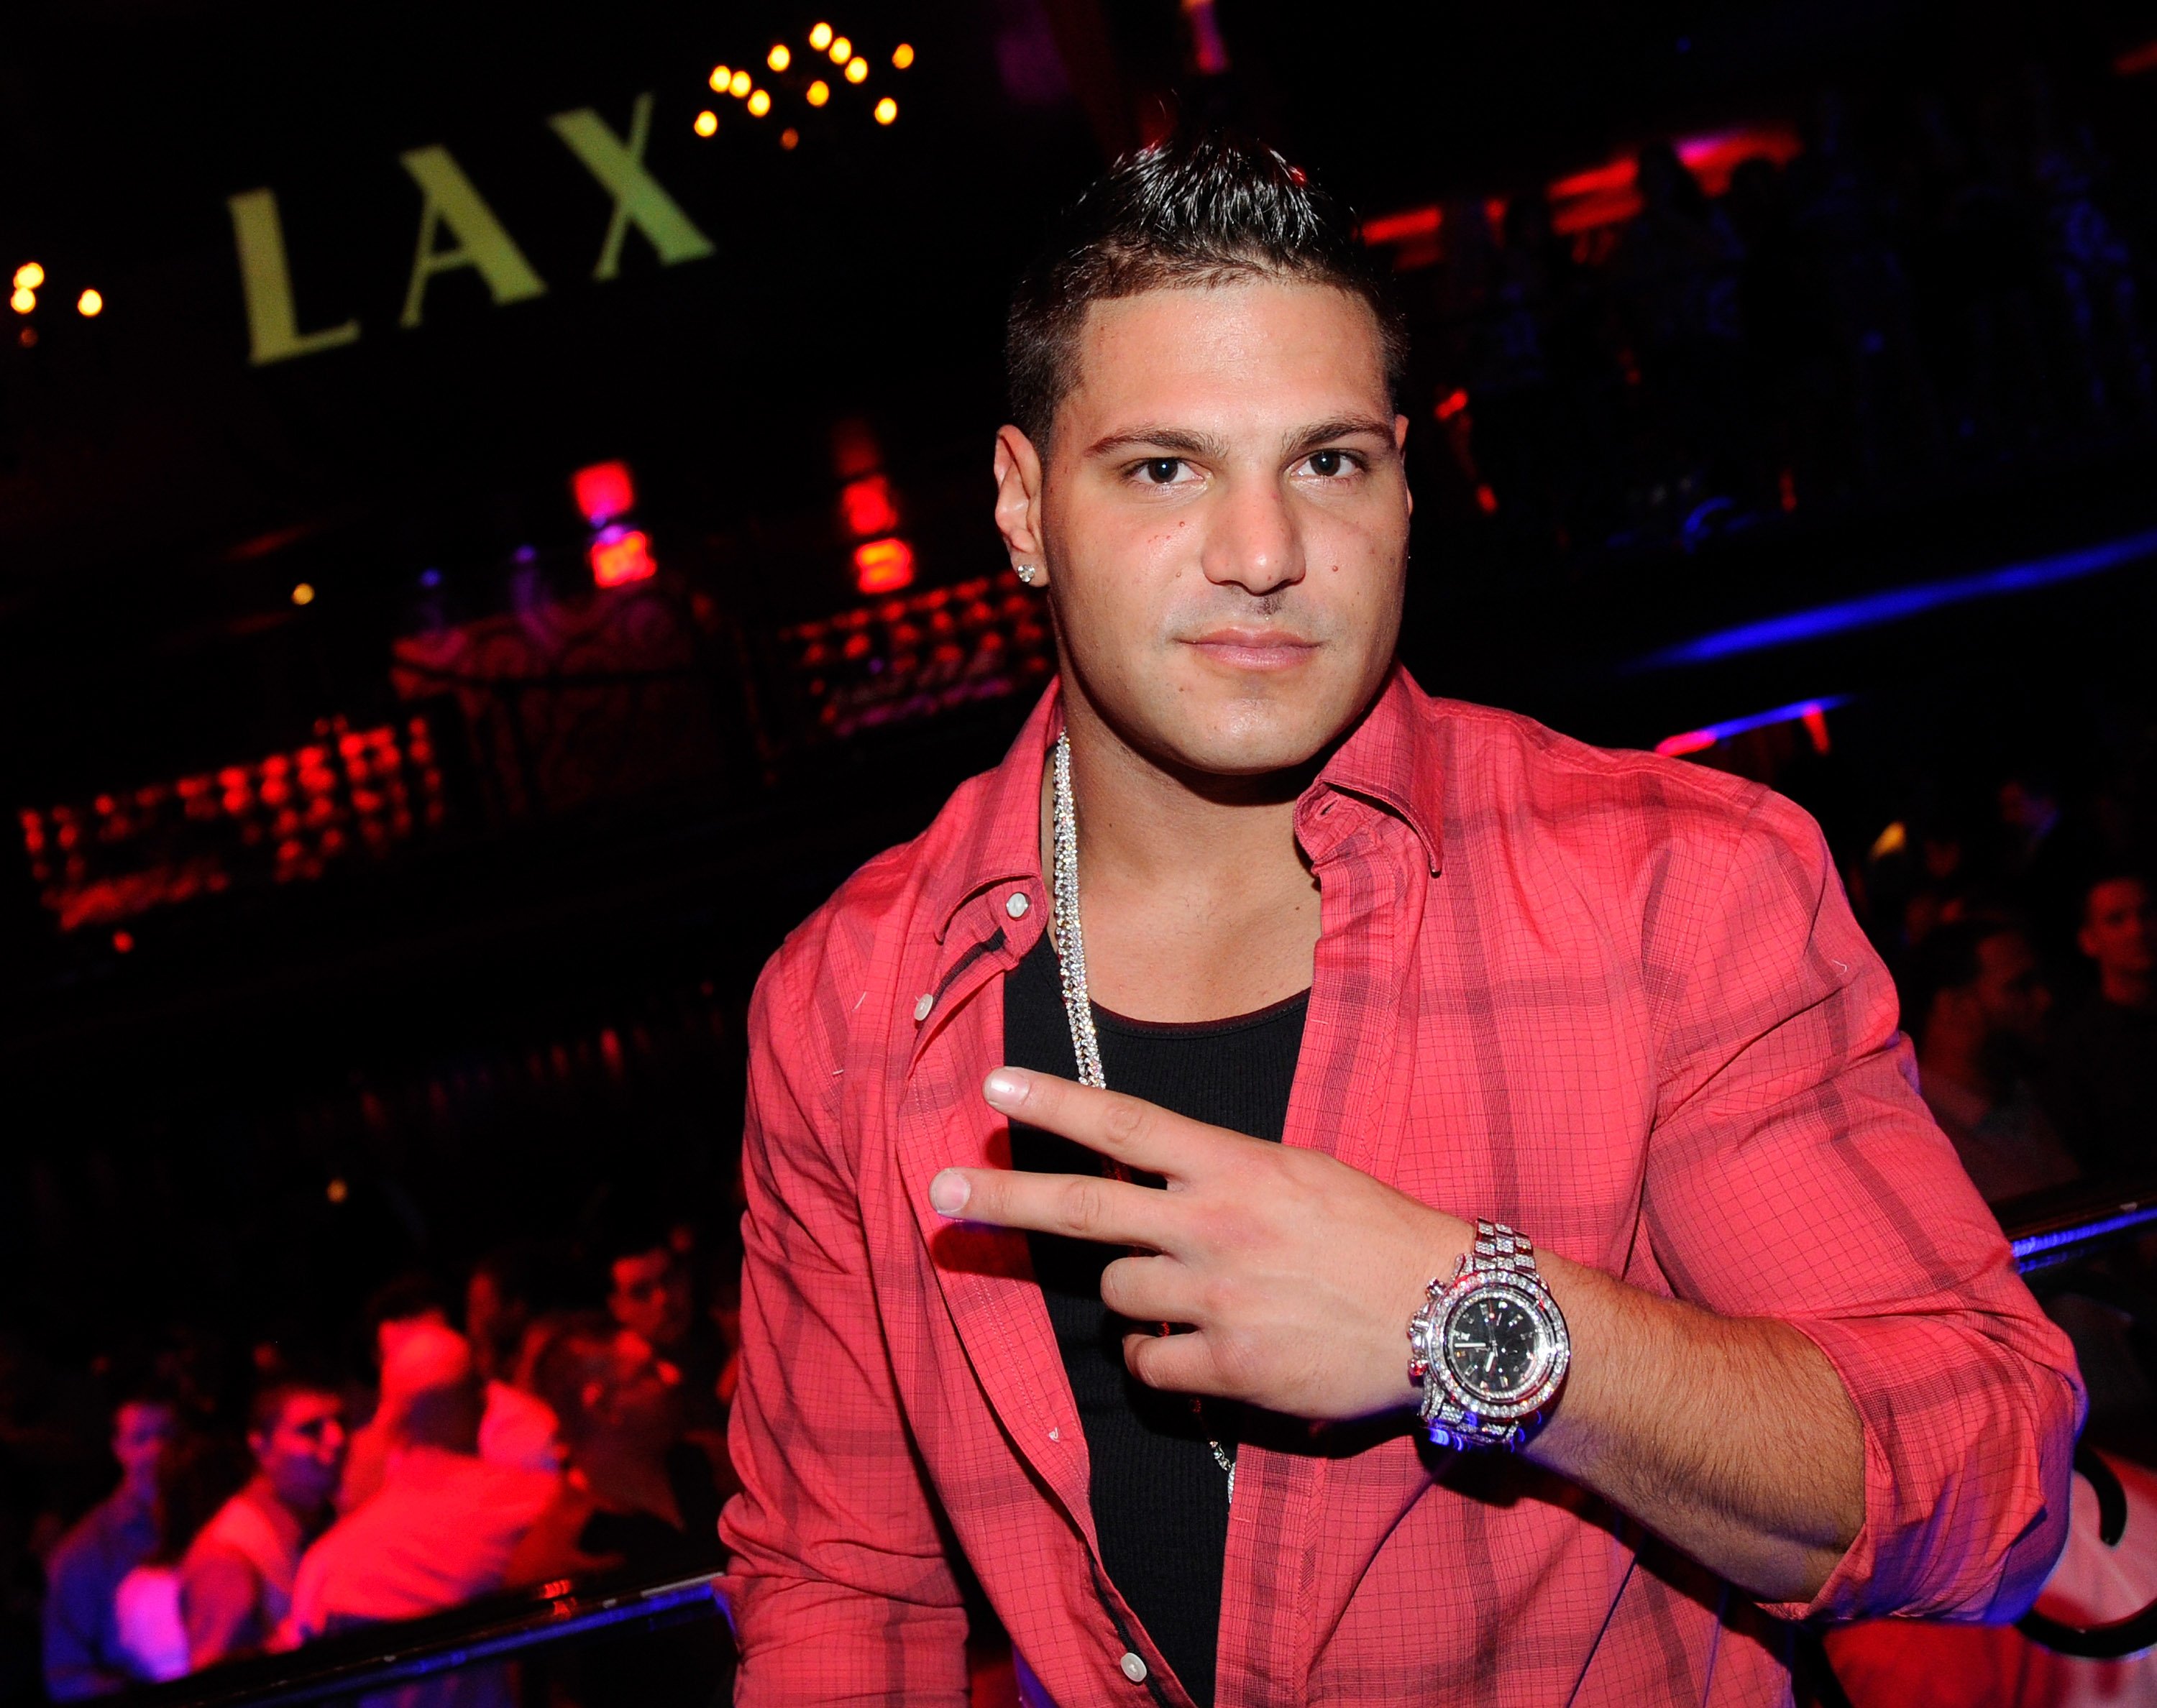 'Jersey Shore' star Ronnie Ortiz-Magro poses with peace sign fingers